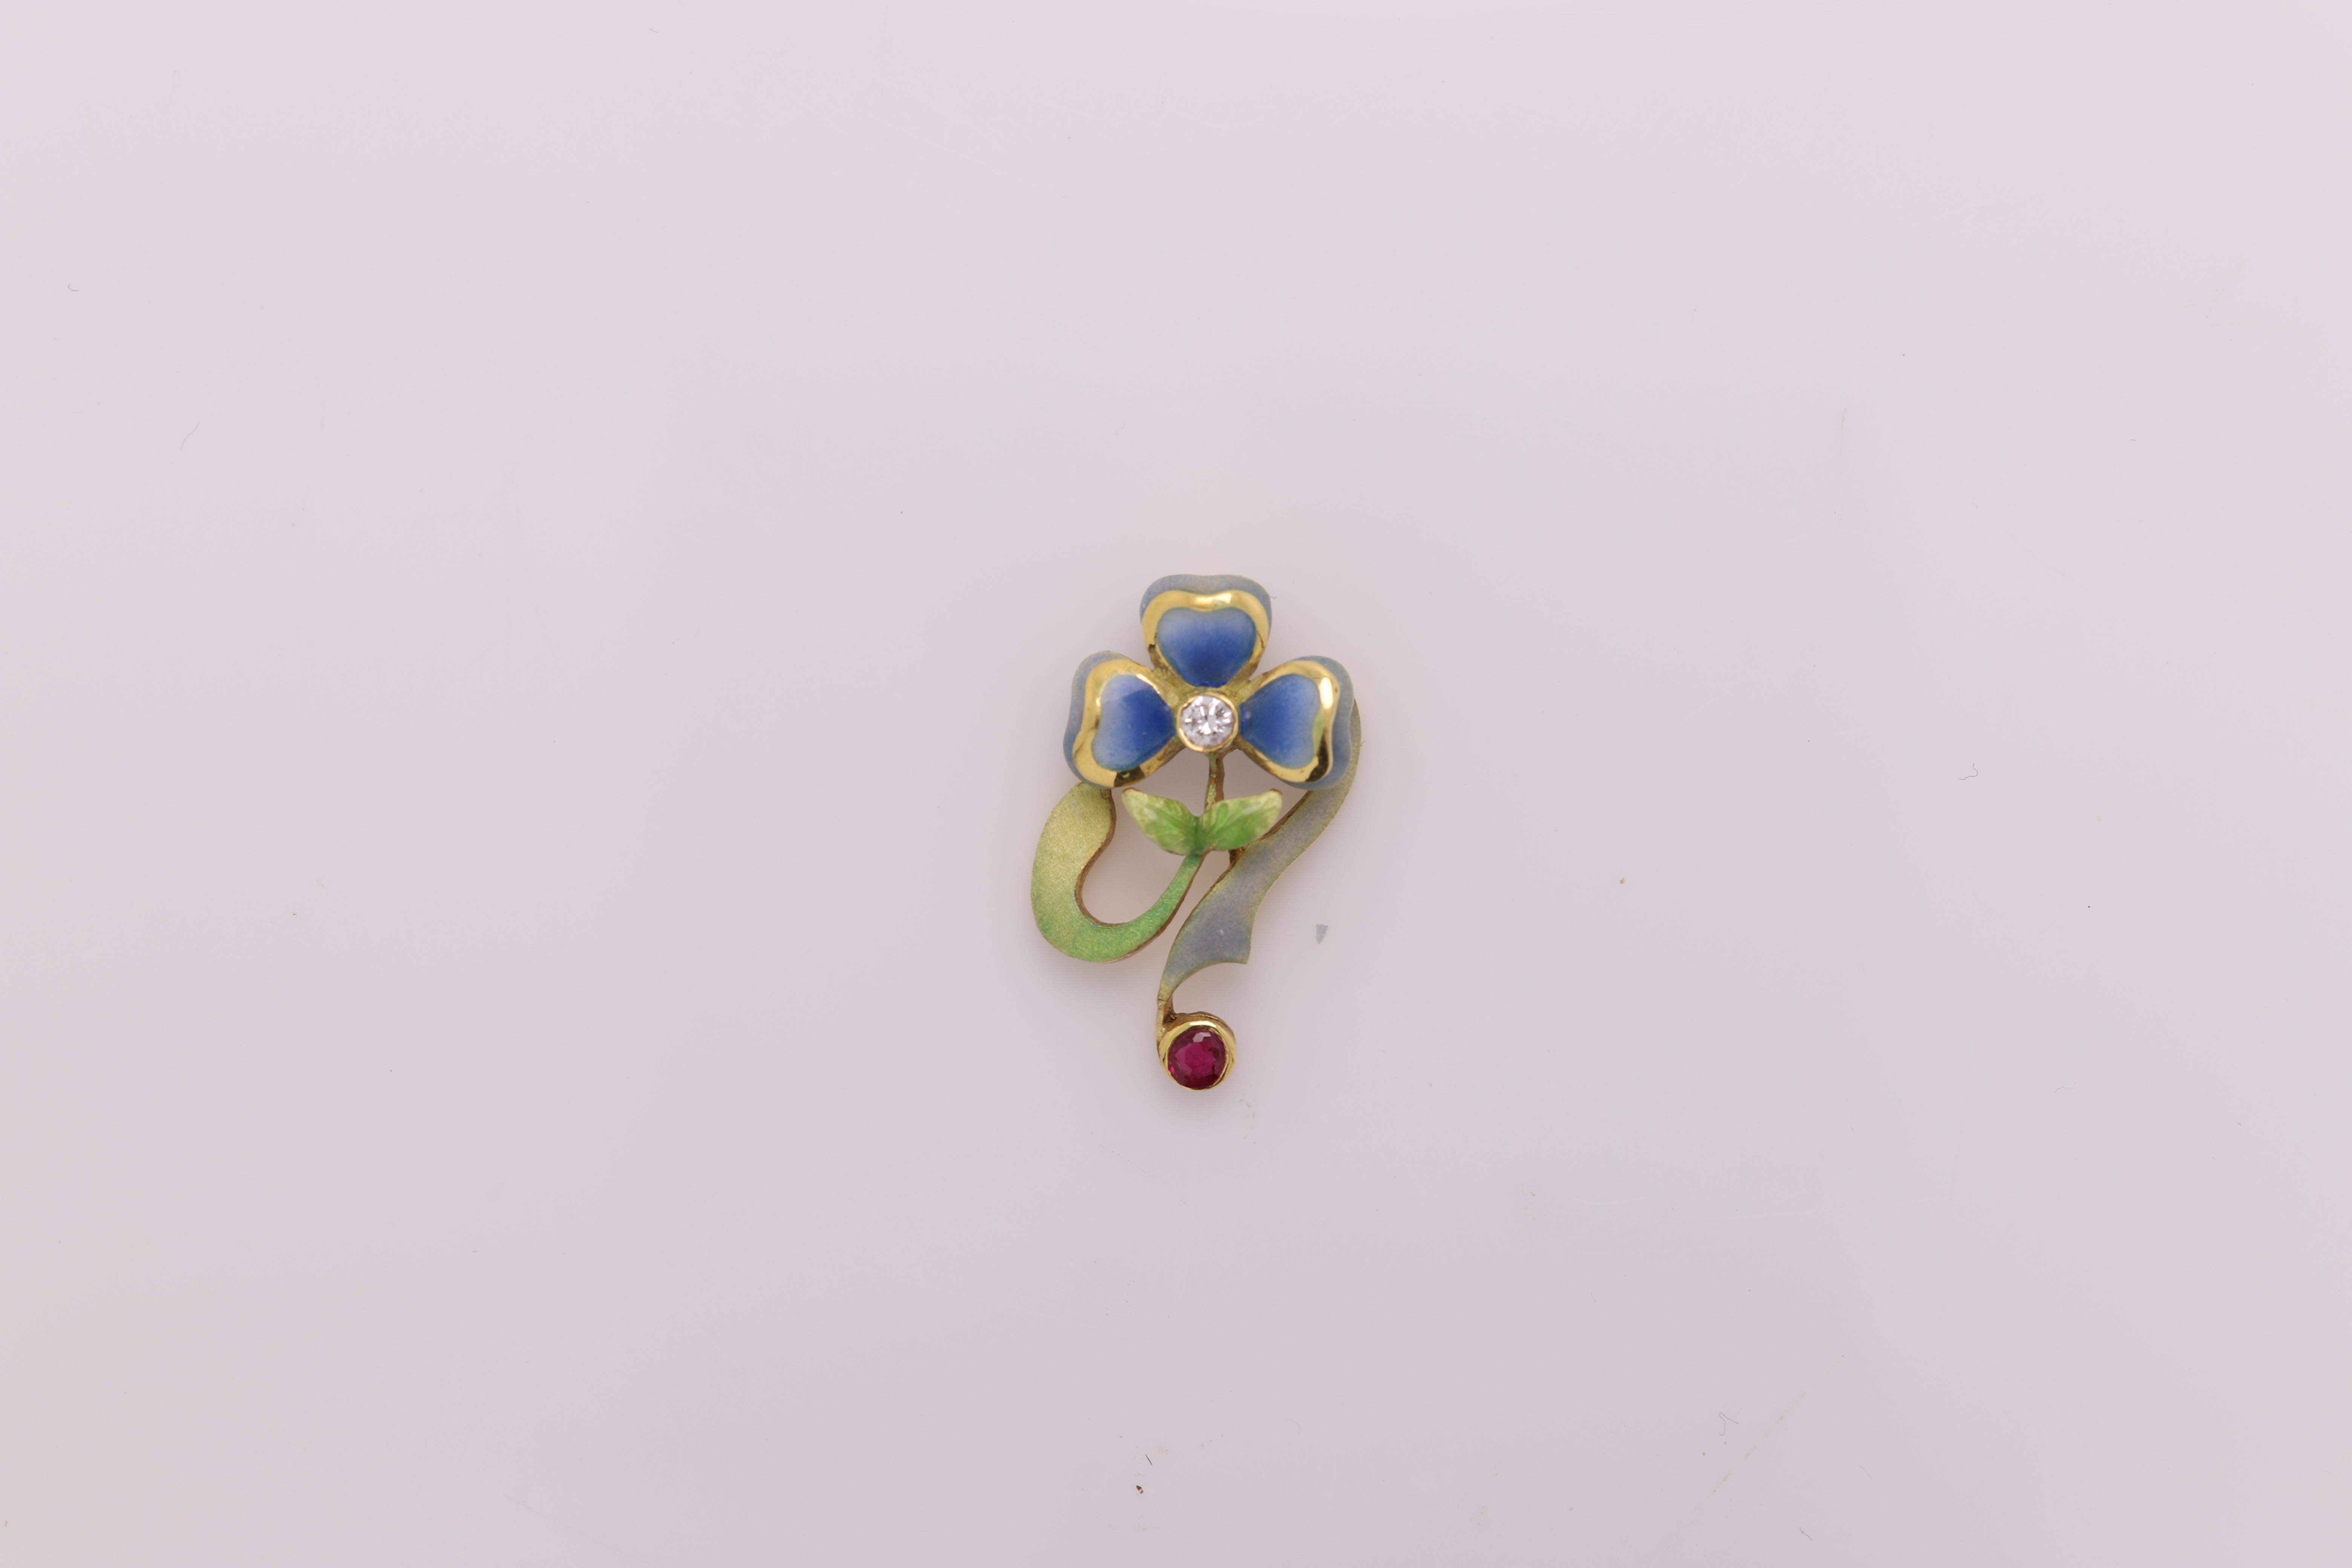 Vintage Hand made in Spain Enamel pendant
18K Yellow Gold 
approx size 1'  inch
has 1 Diamond and 1 Ruby (all natural)
Weight approx 3.5 grams
Style is based from the period of Nouveau 
approx made 20+ years ago
Overall great condition (a bit aged